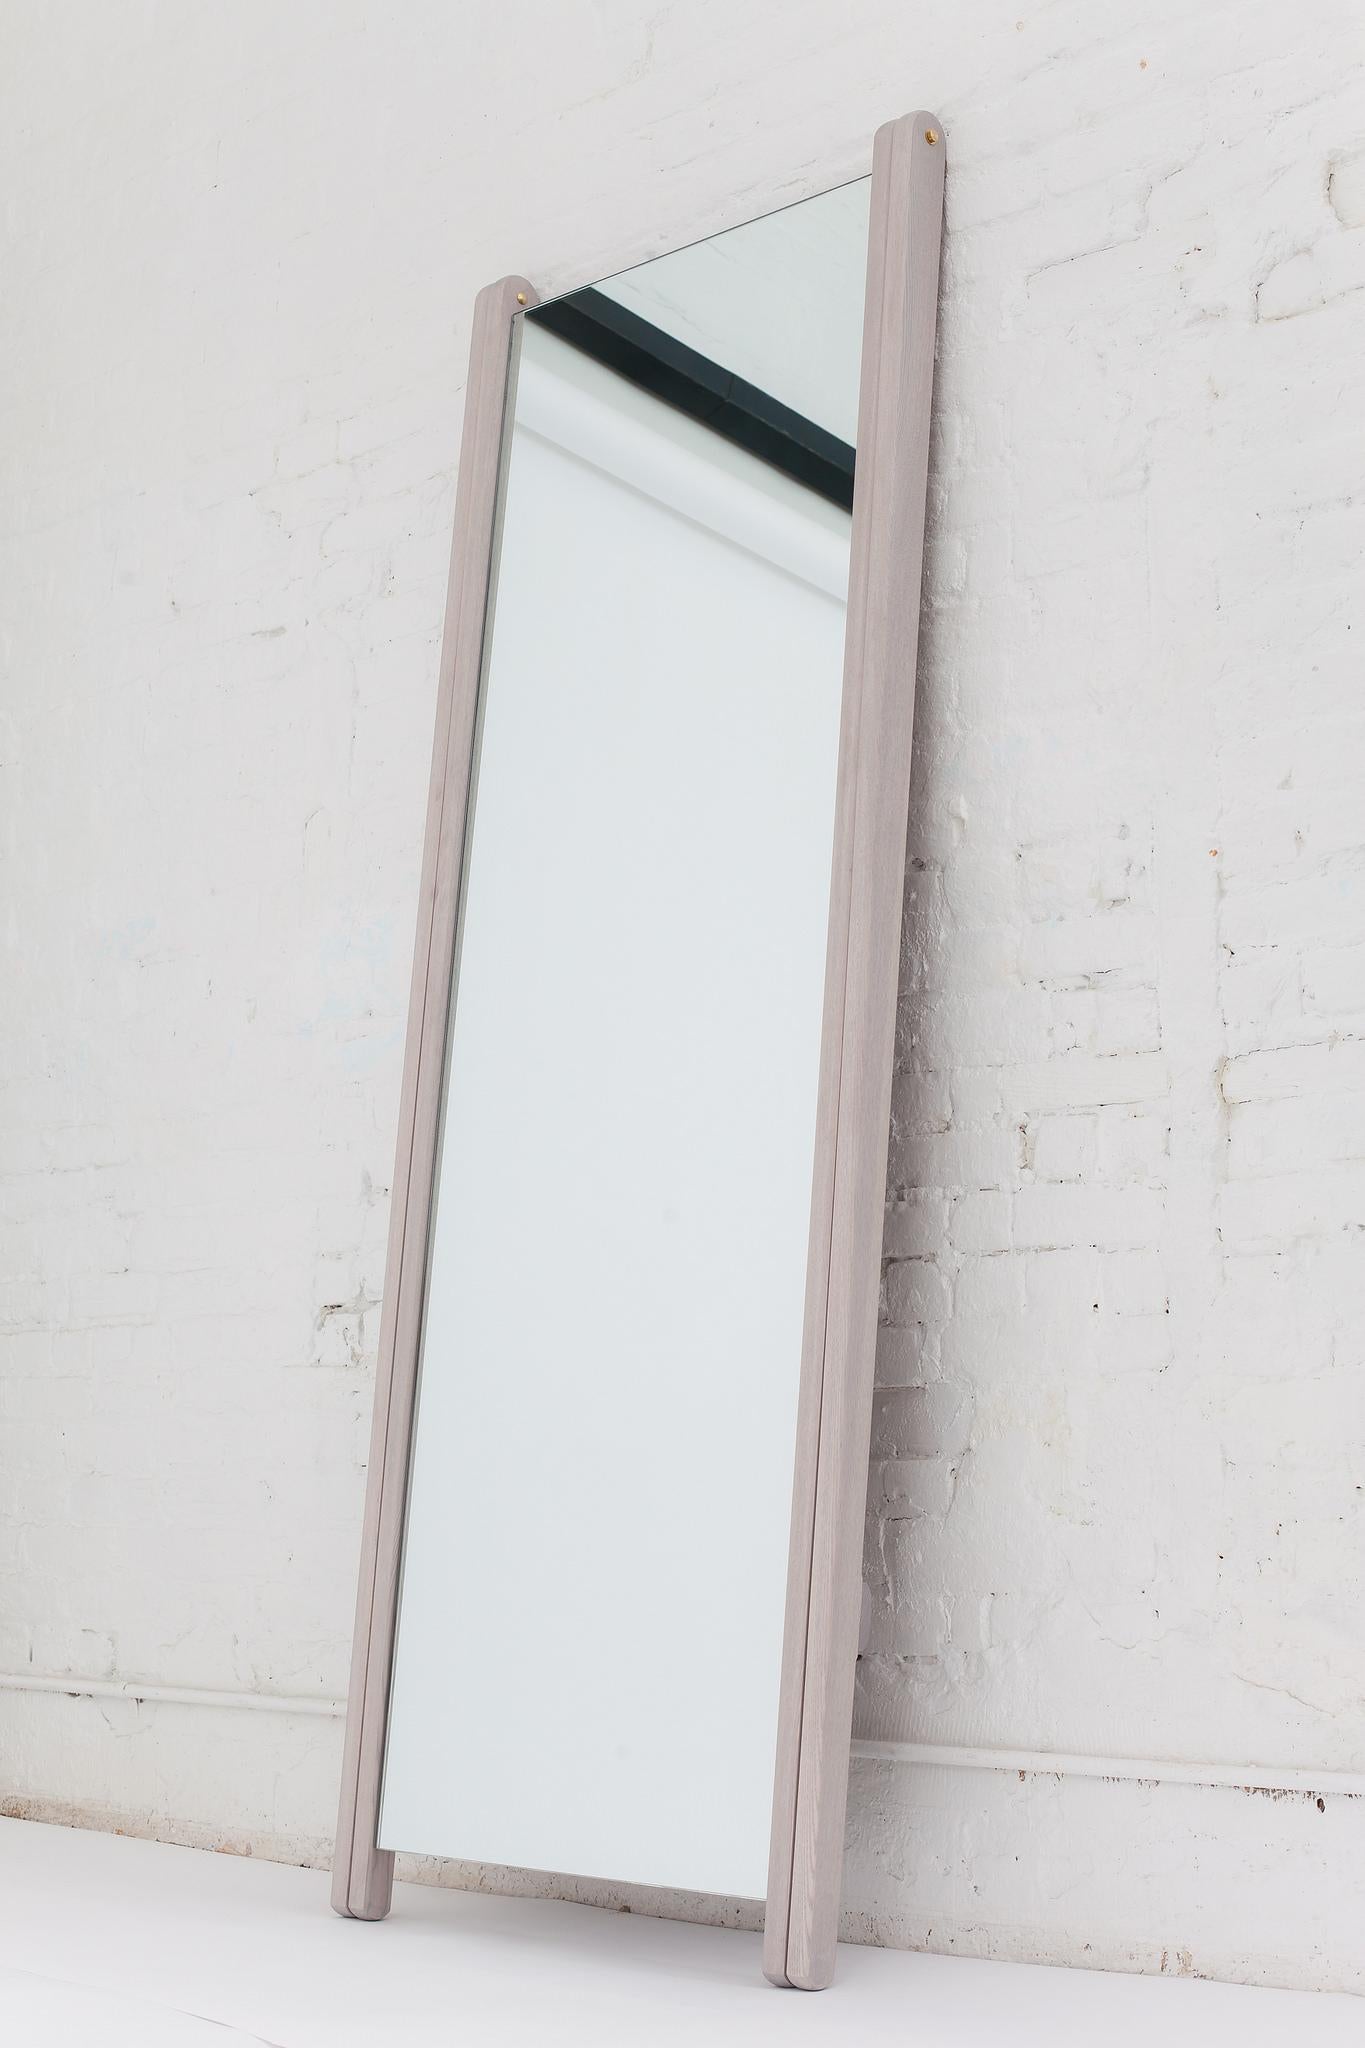 Large and luxurious, the Libertine mirror stands lightly on its tapered legs. Leave it open in the ‘compass’ position, or fold it flat to lean against the wall for a smaller footprint. A strong backing prevents the mirror from experiencing any